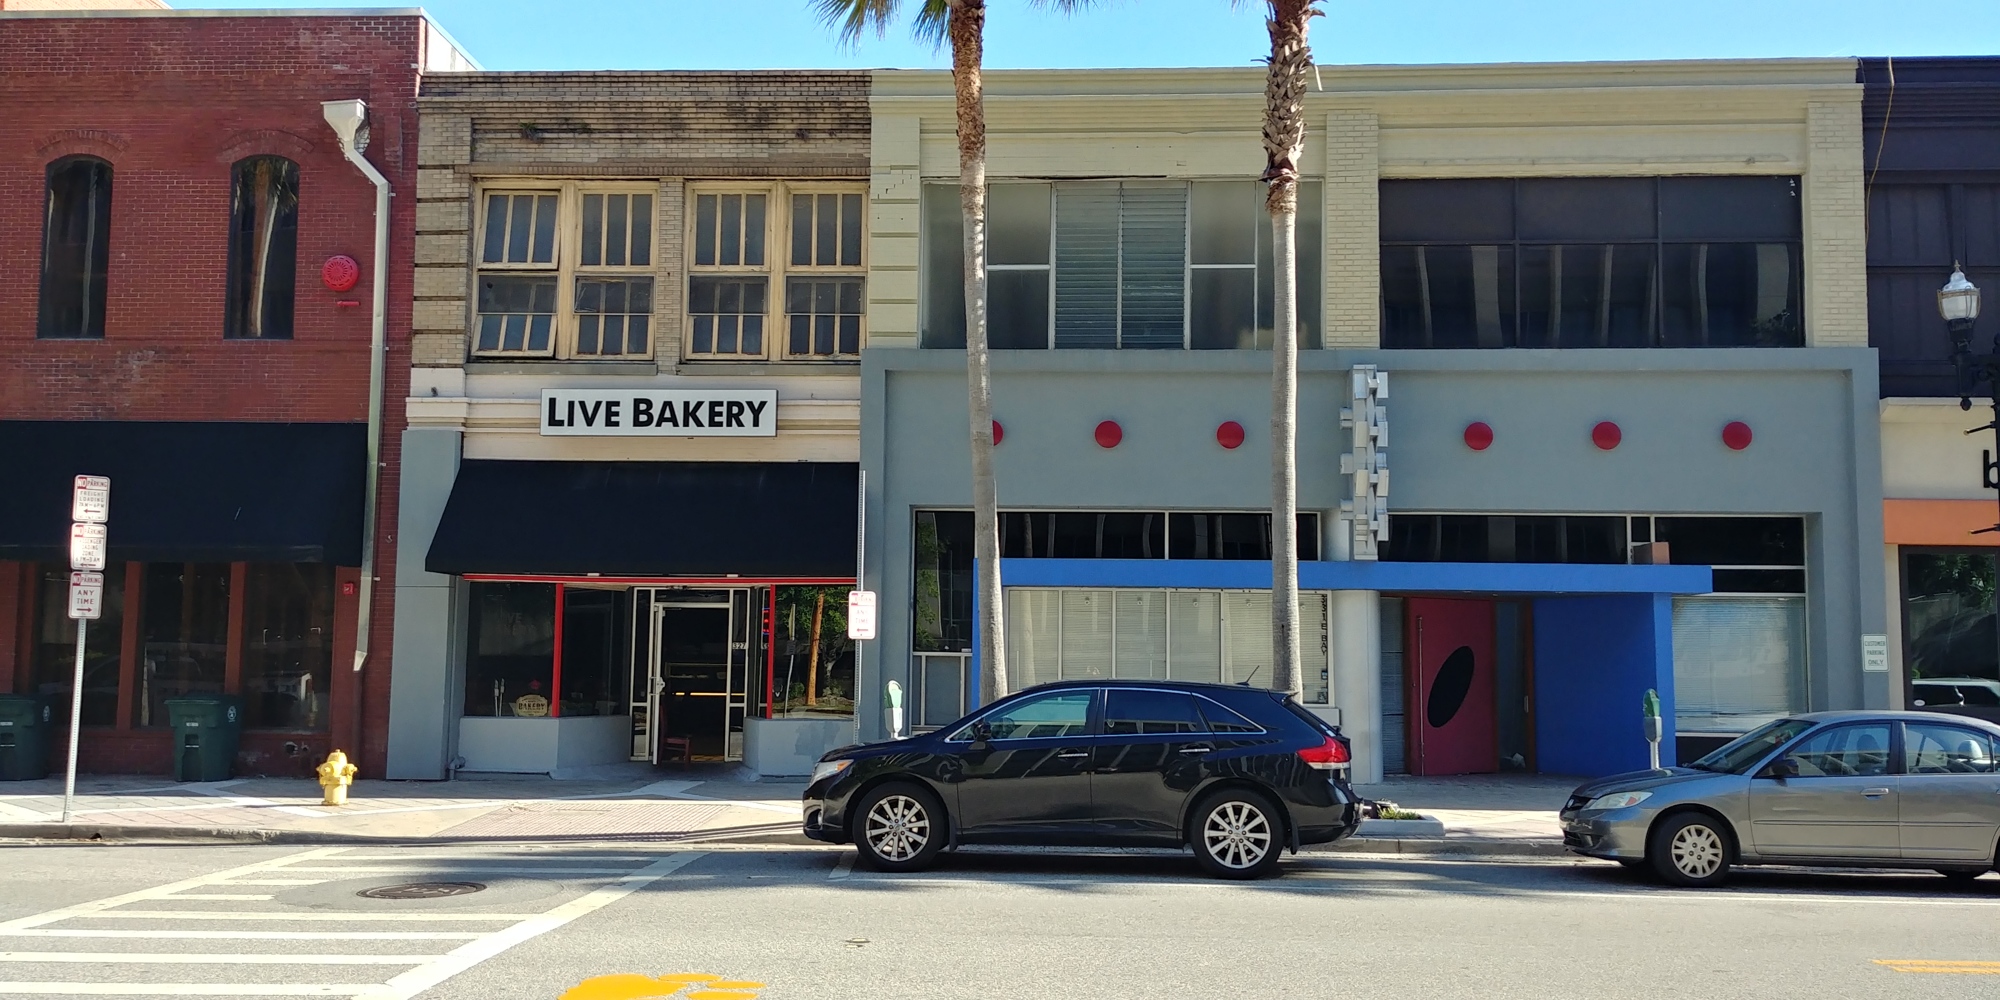 Live Bakery at 327 E. Bay St. shares a space with Live Bar.